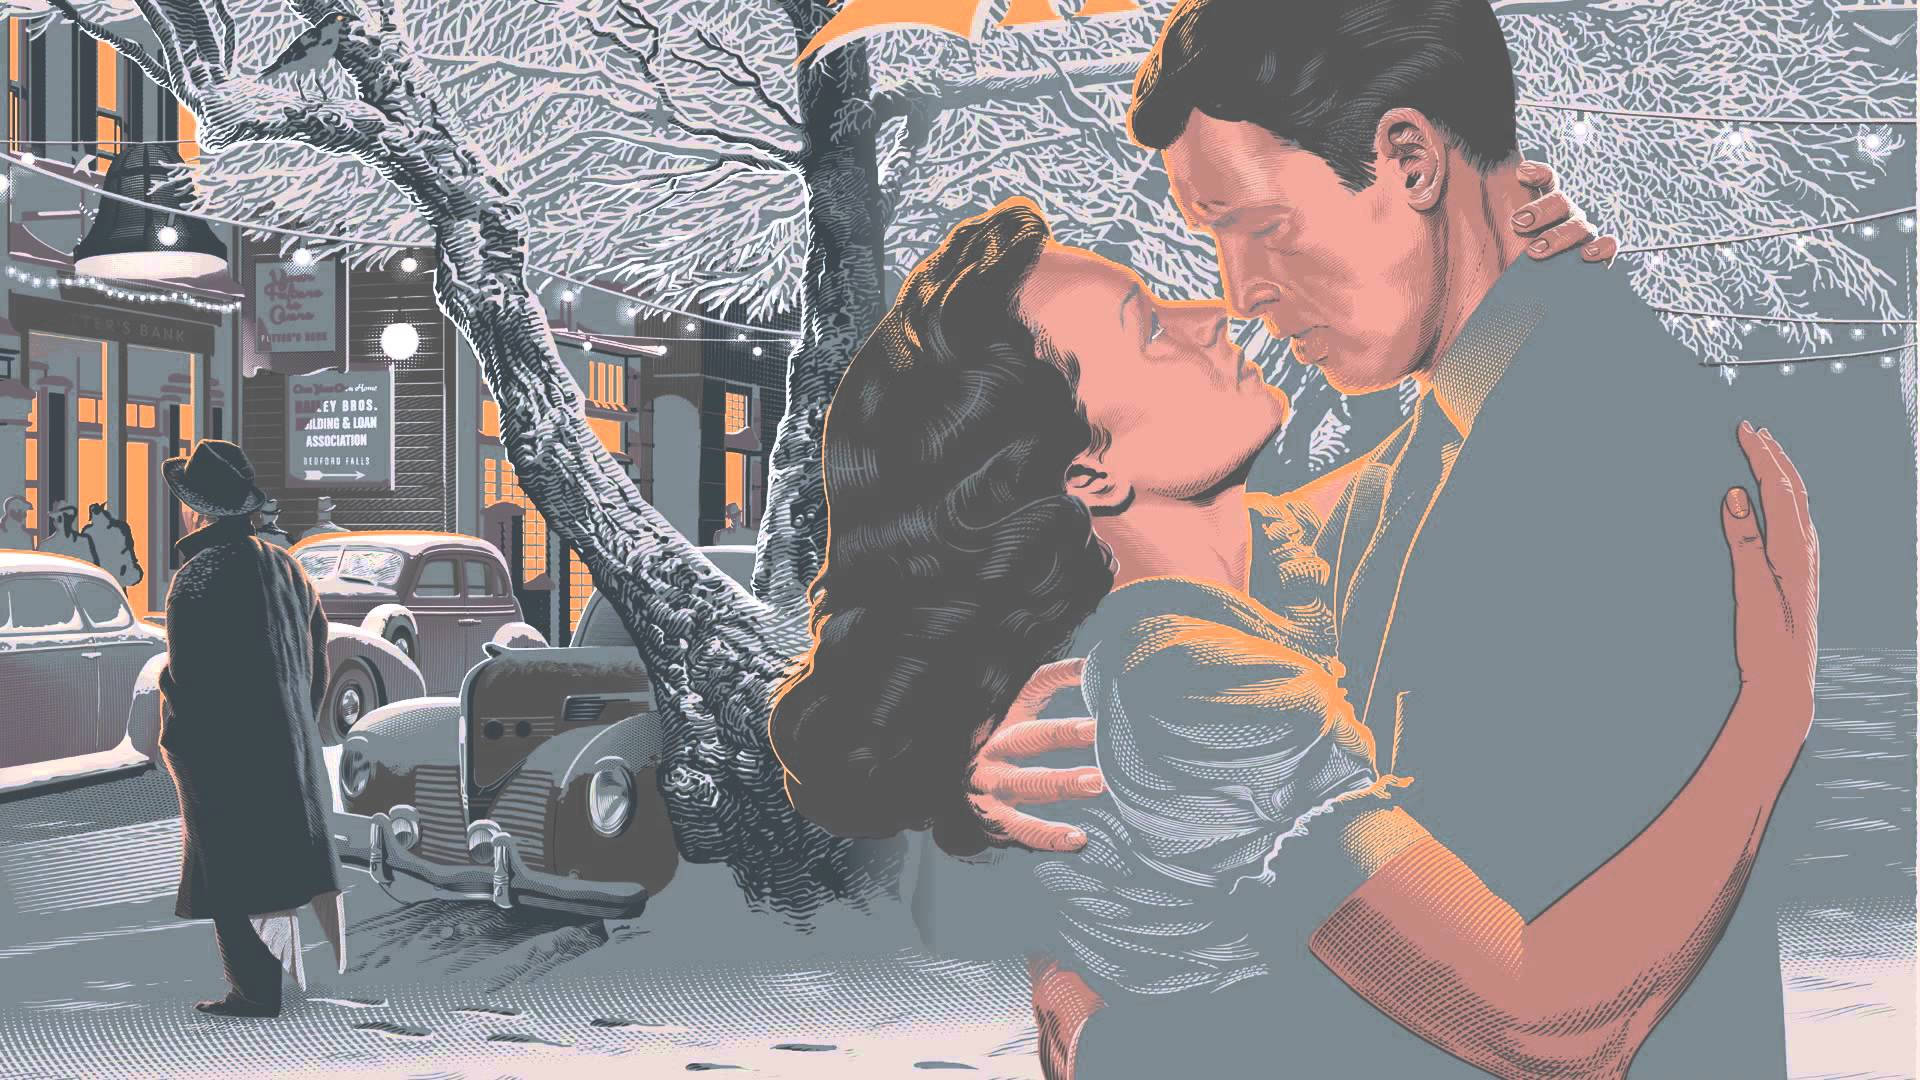 It's A Wonderful Life Painting Lovers Wallpaper